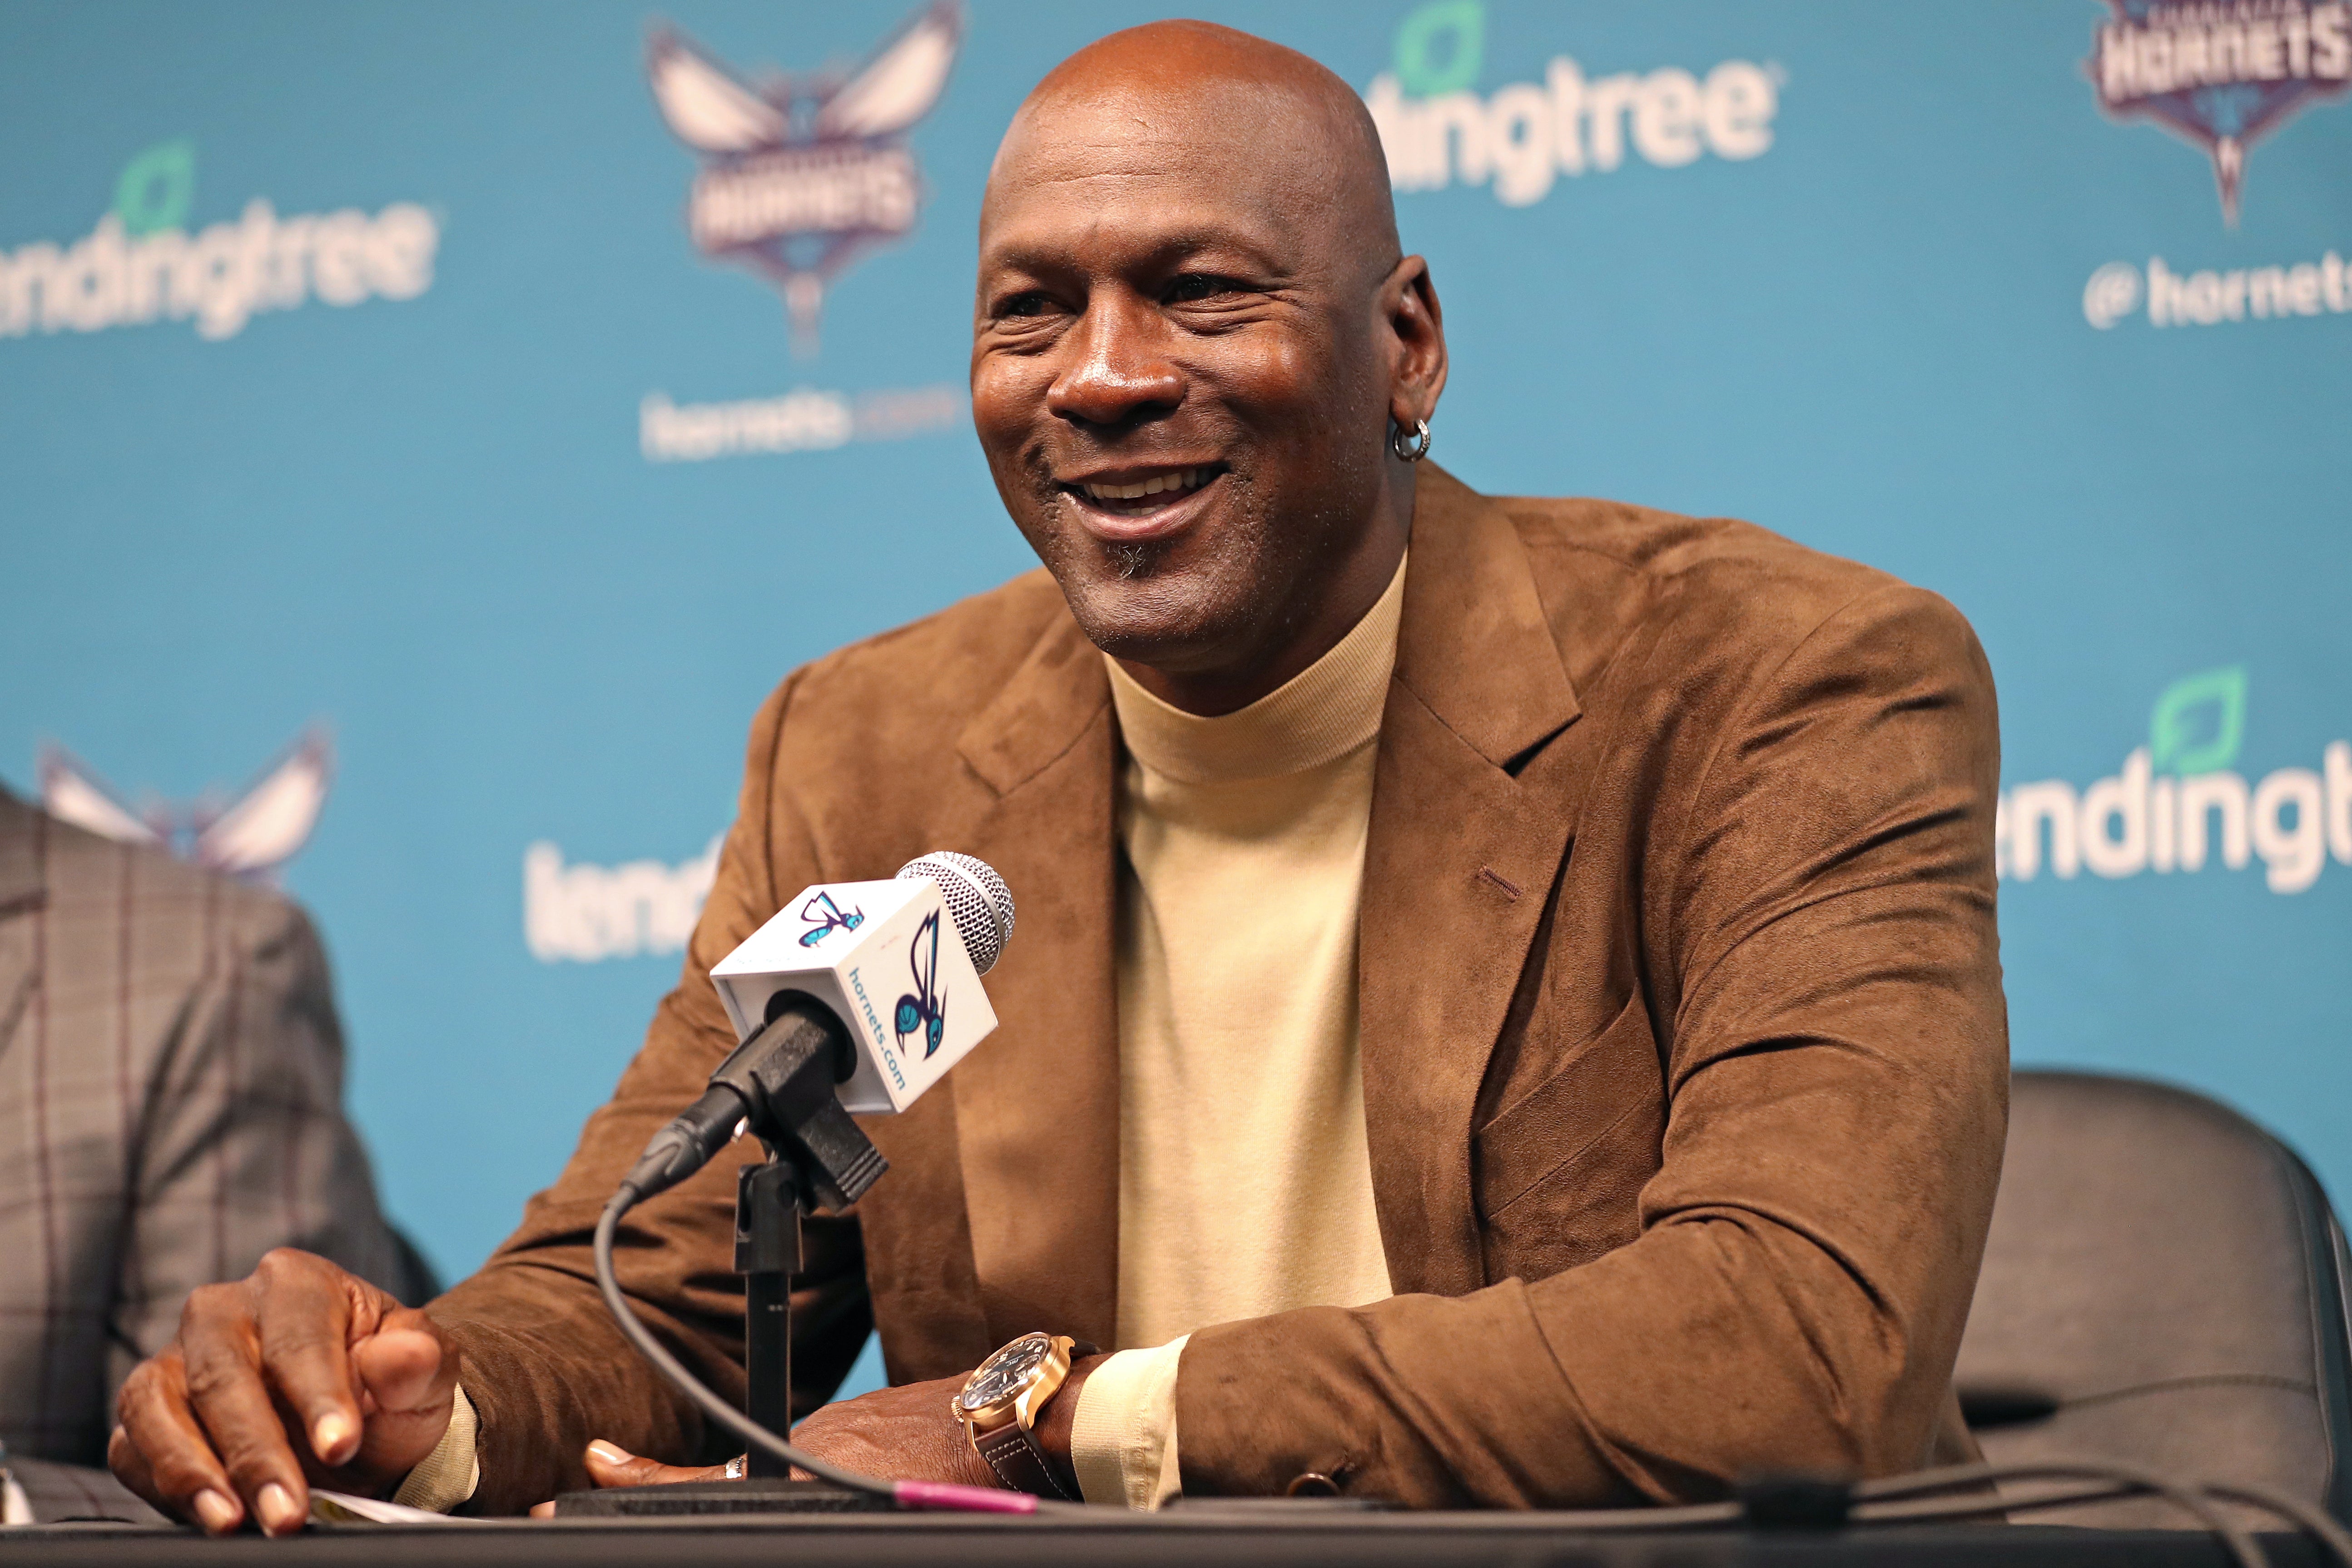 Michael Jordan Opens New Clinic For Patients With Little Or No Health Insurance